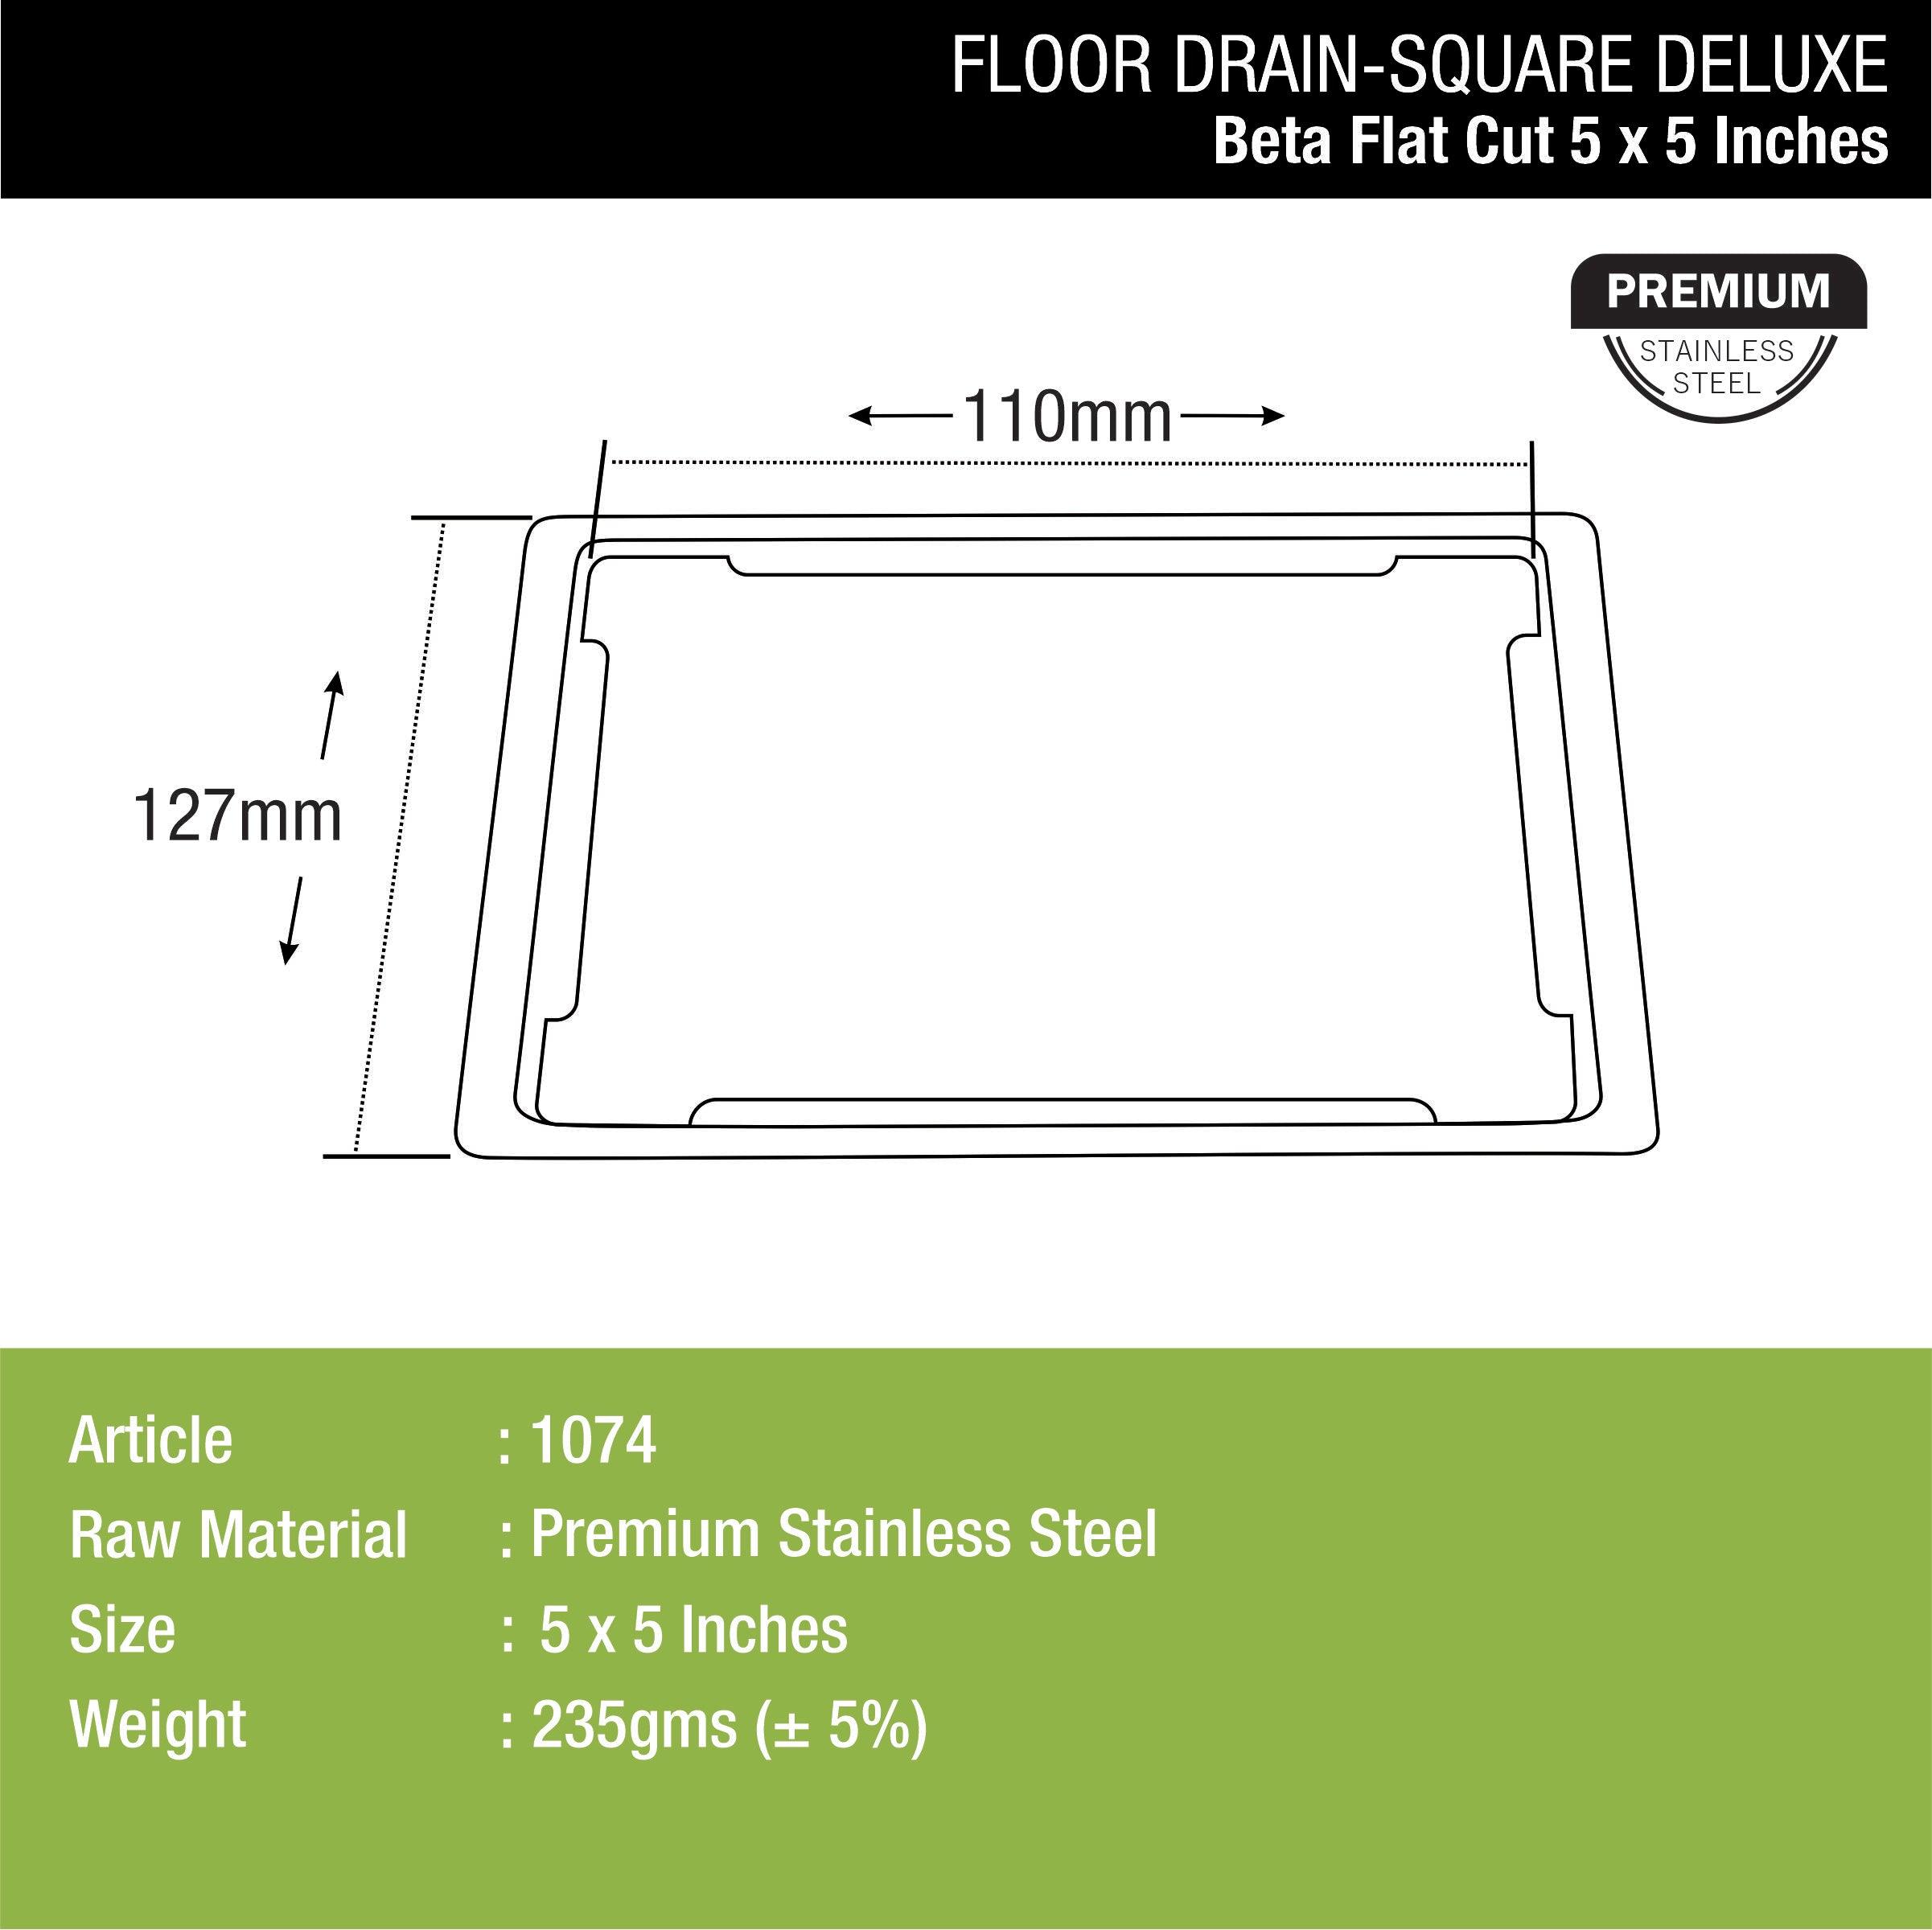 Beta Deluxe Square Flat Cut Floor Drain (5 x 5 Inches) dimensions and sizes